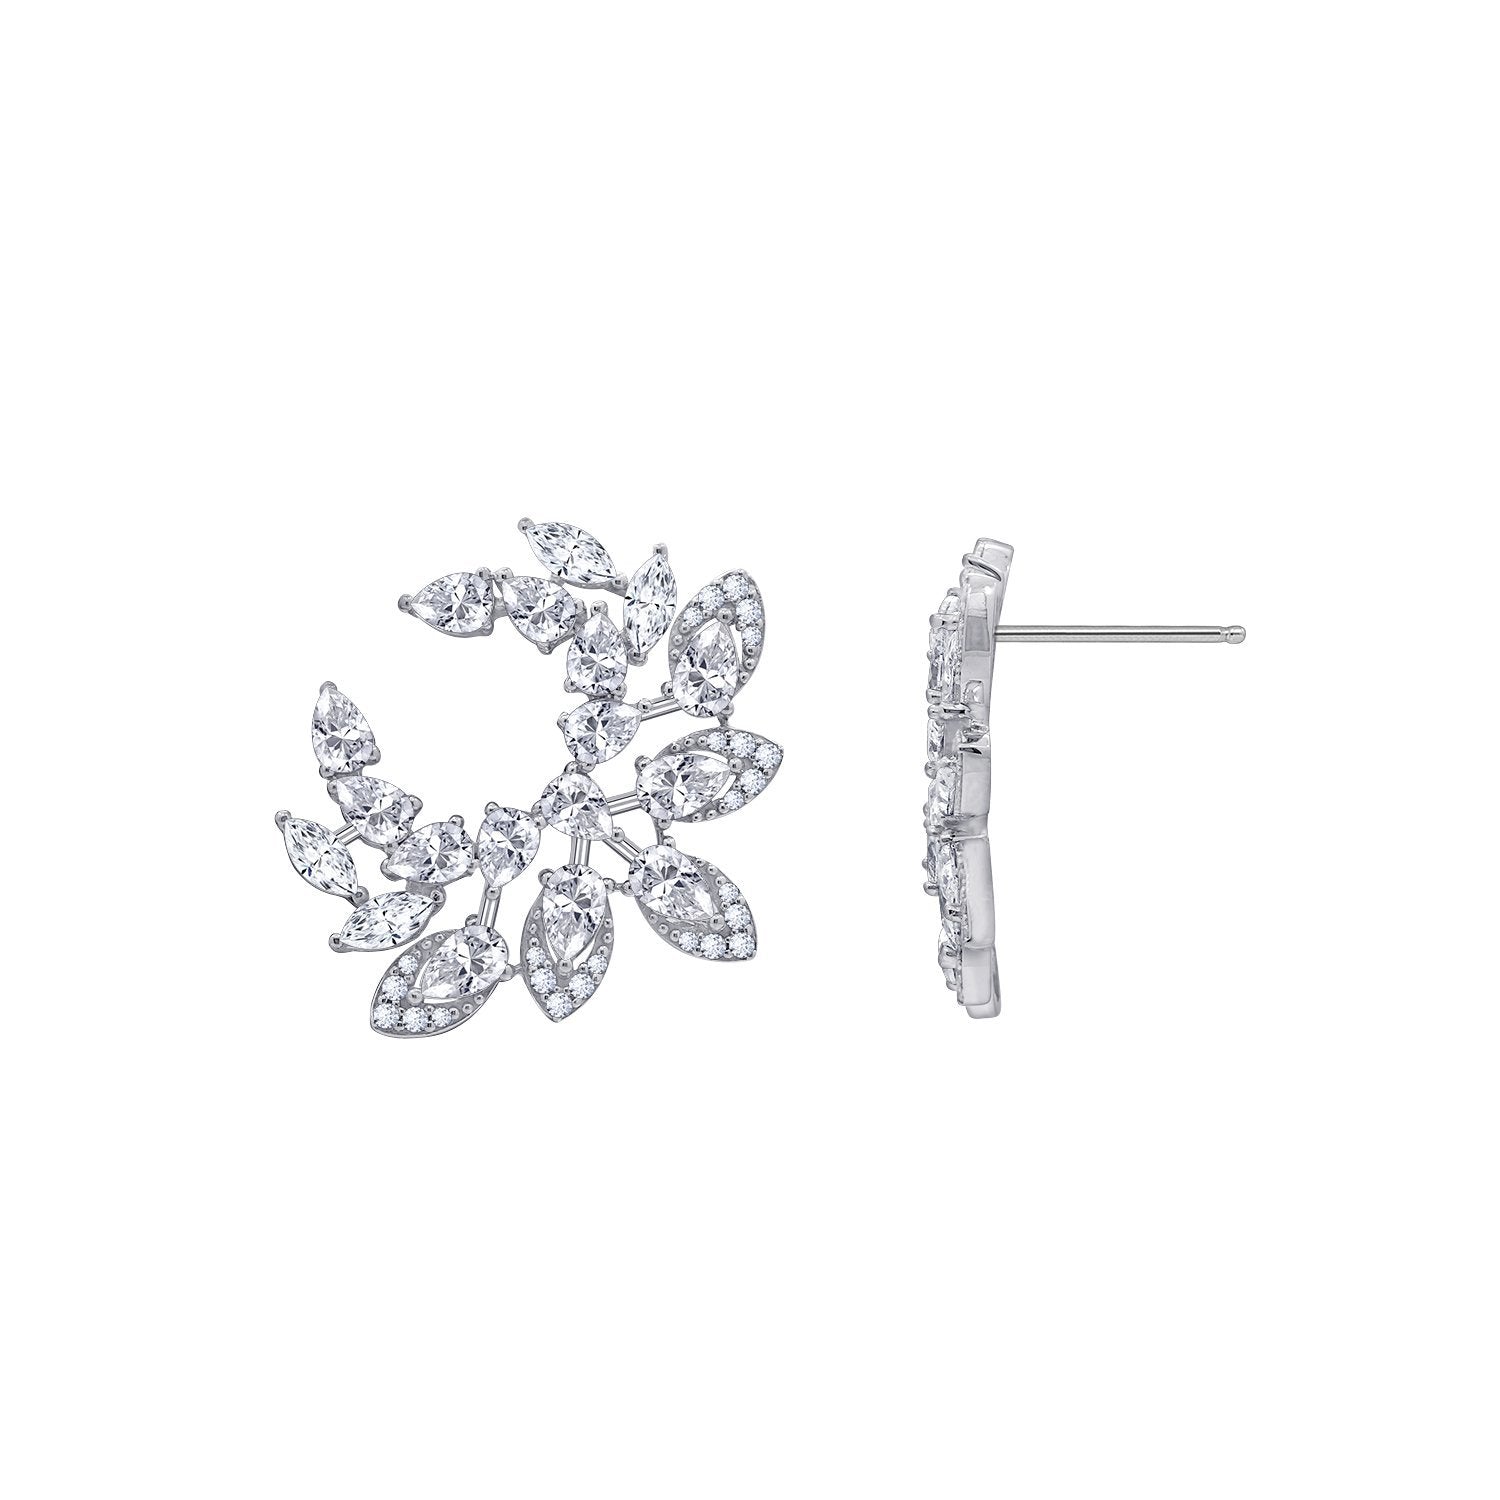 KIERA COUTURE Platinum Clad Sterling Silver Floral 6.38 cttw Cubic Zirconia Statement Earrings